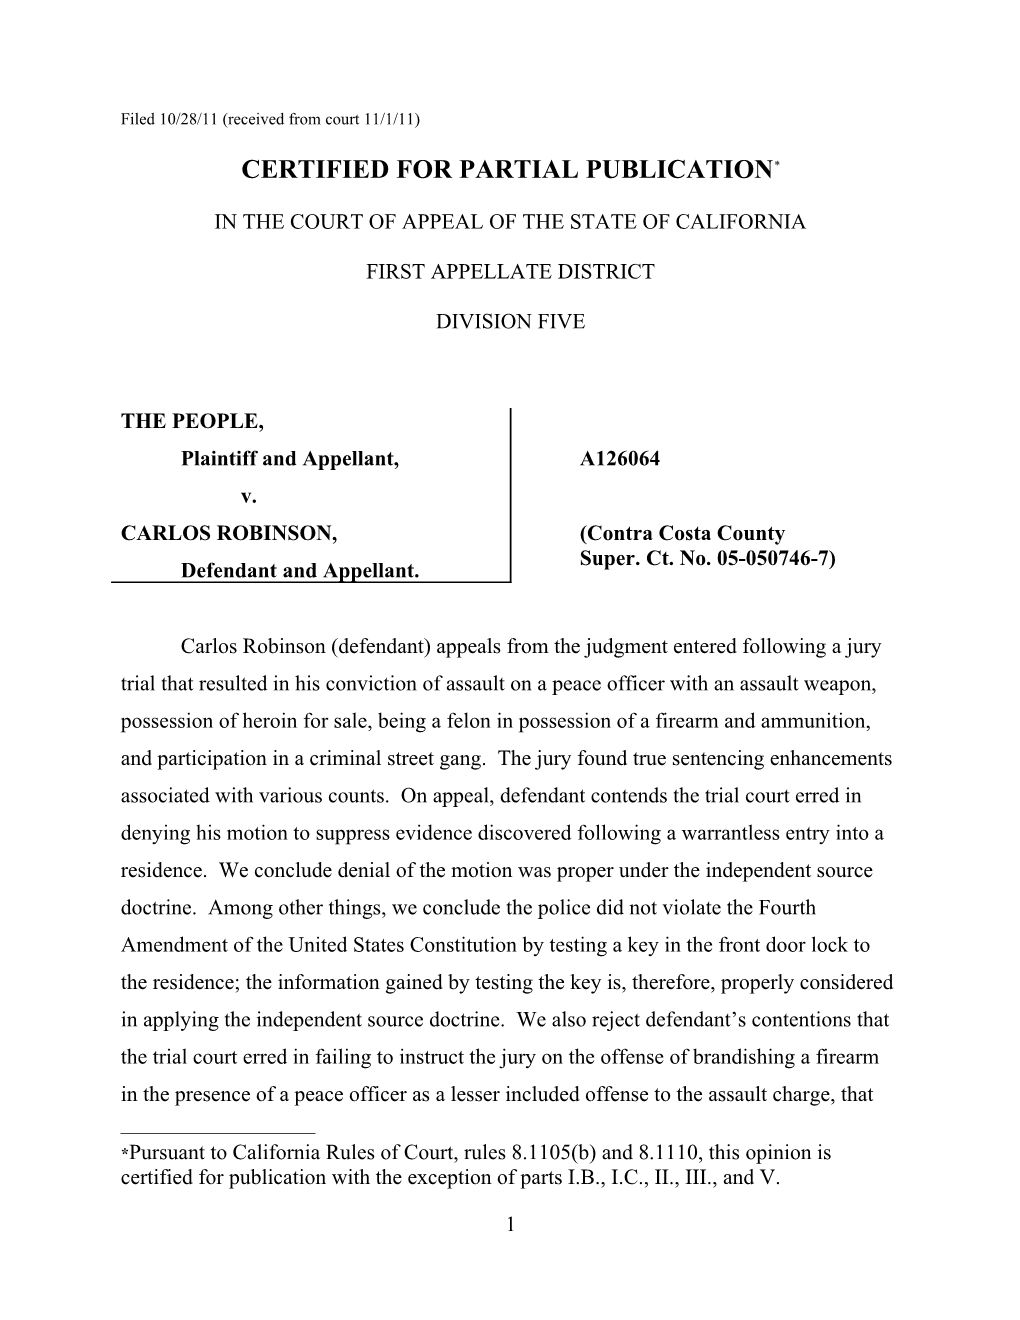 Filed 10/28/11 (Received from Court 11/1/11)